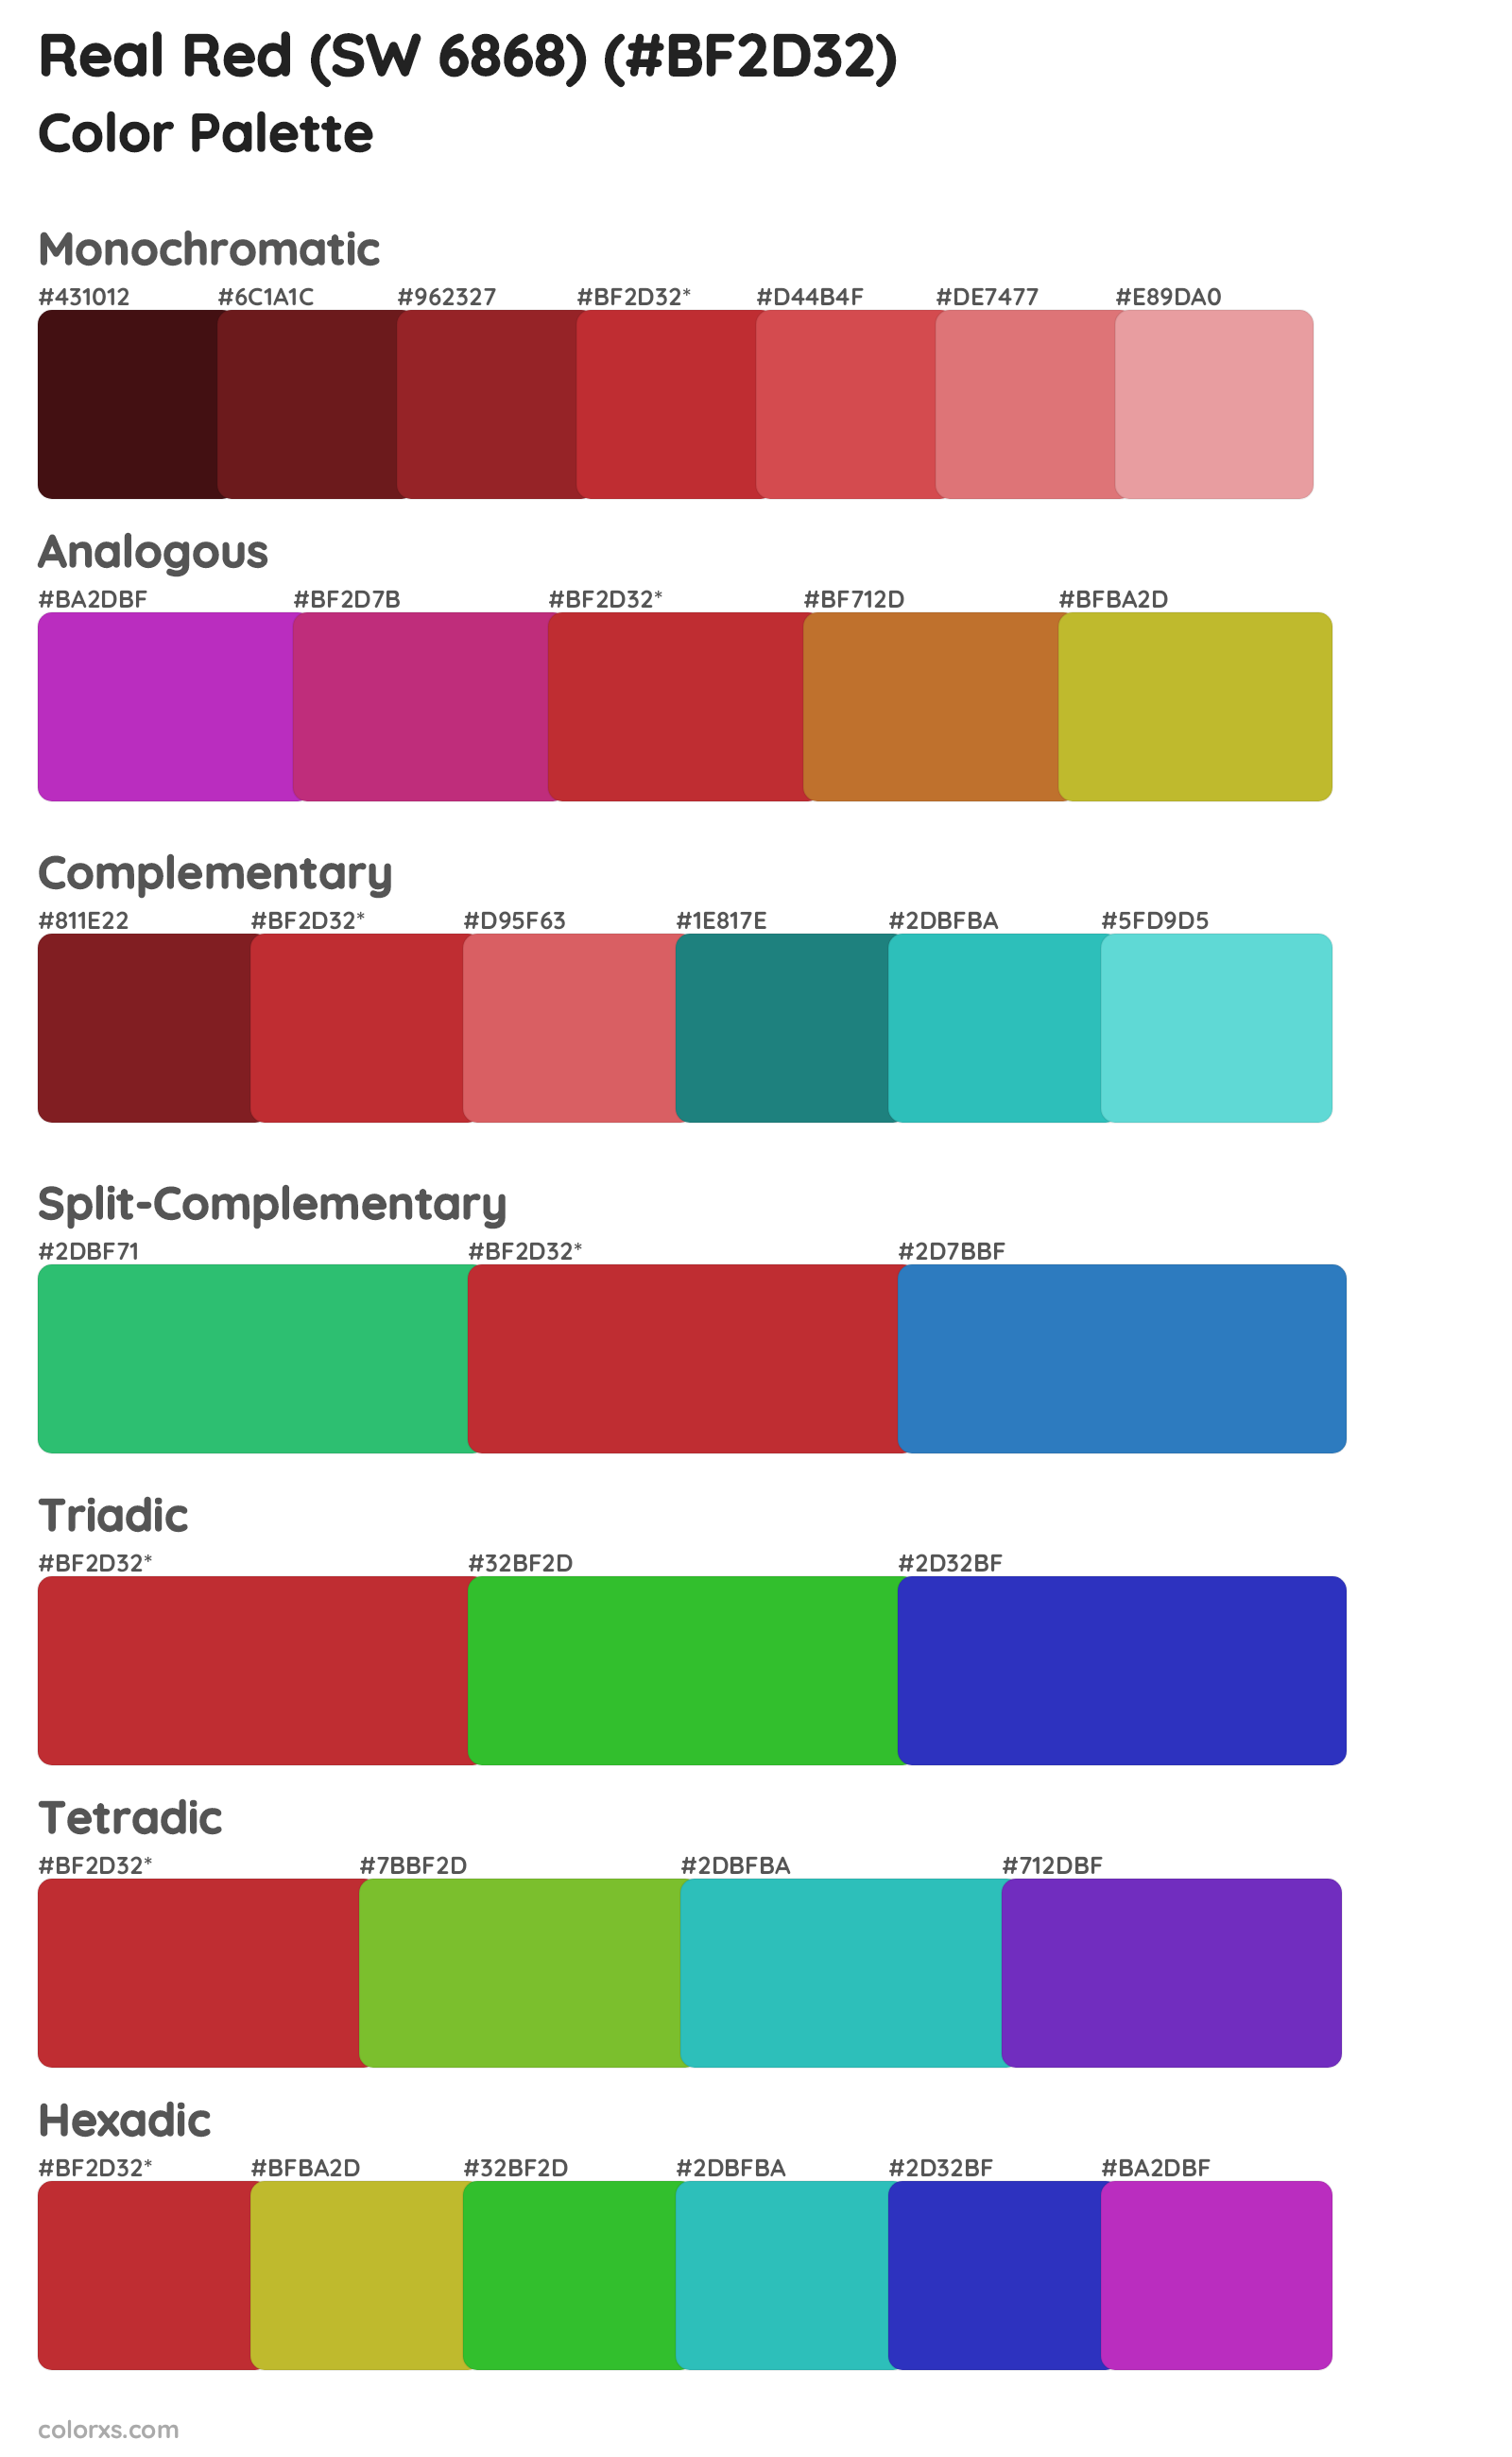 Real Red (SW 6868) Color Scheme Palettes